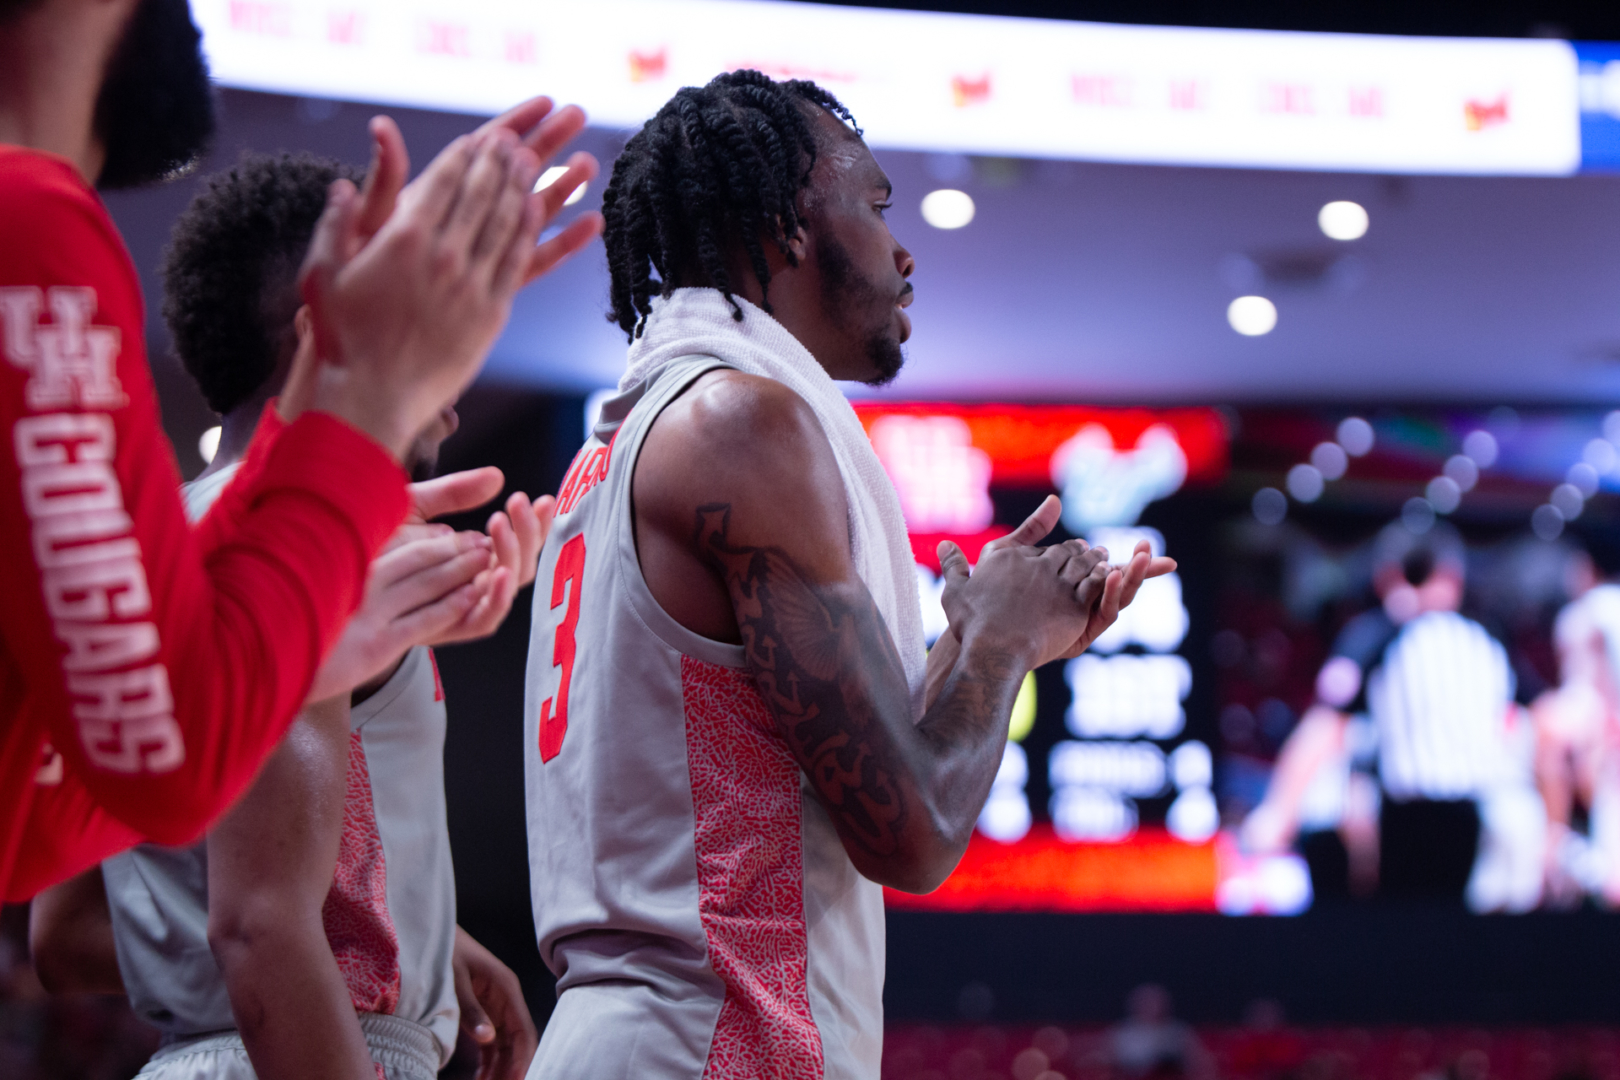 Sophomore guard DeJon Jarreau followed up his near triple-double against UConn on Thursday with a 12-point outing to lead the Cougars over the South Florida Bulls on Sunday afternoon at Fertitta Center. | Kathryn Lenihan/The Cougar